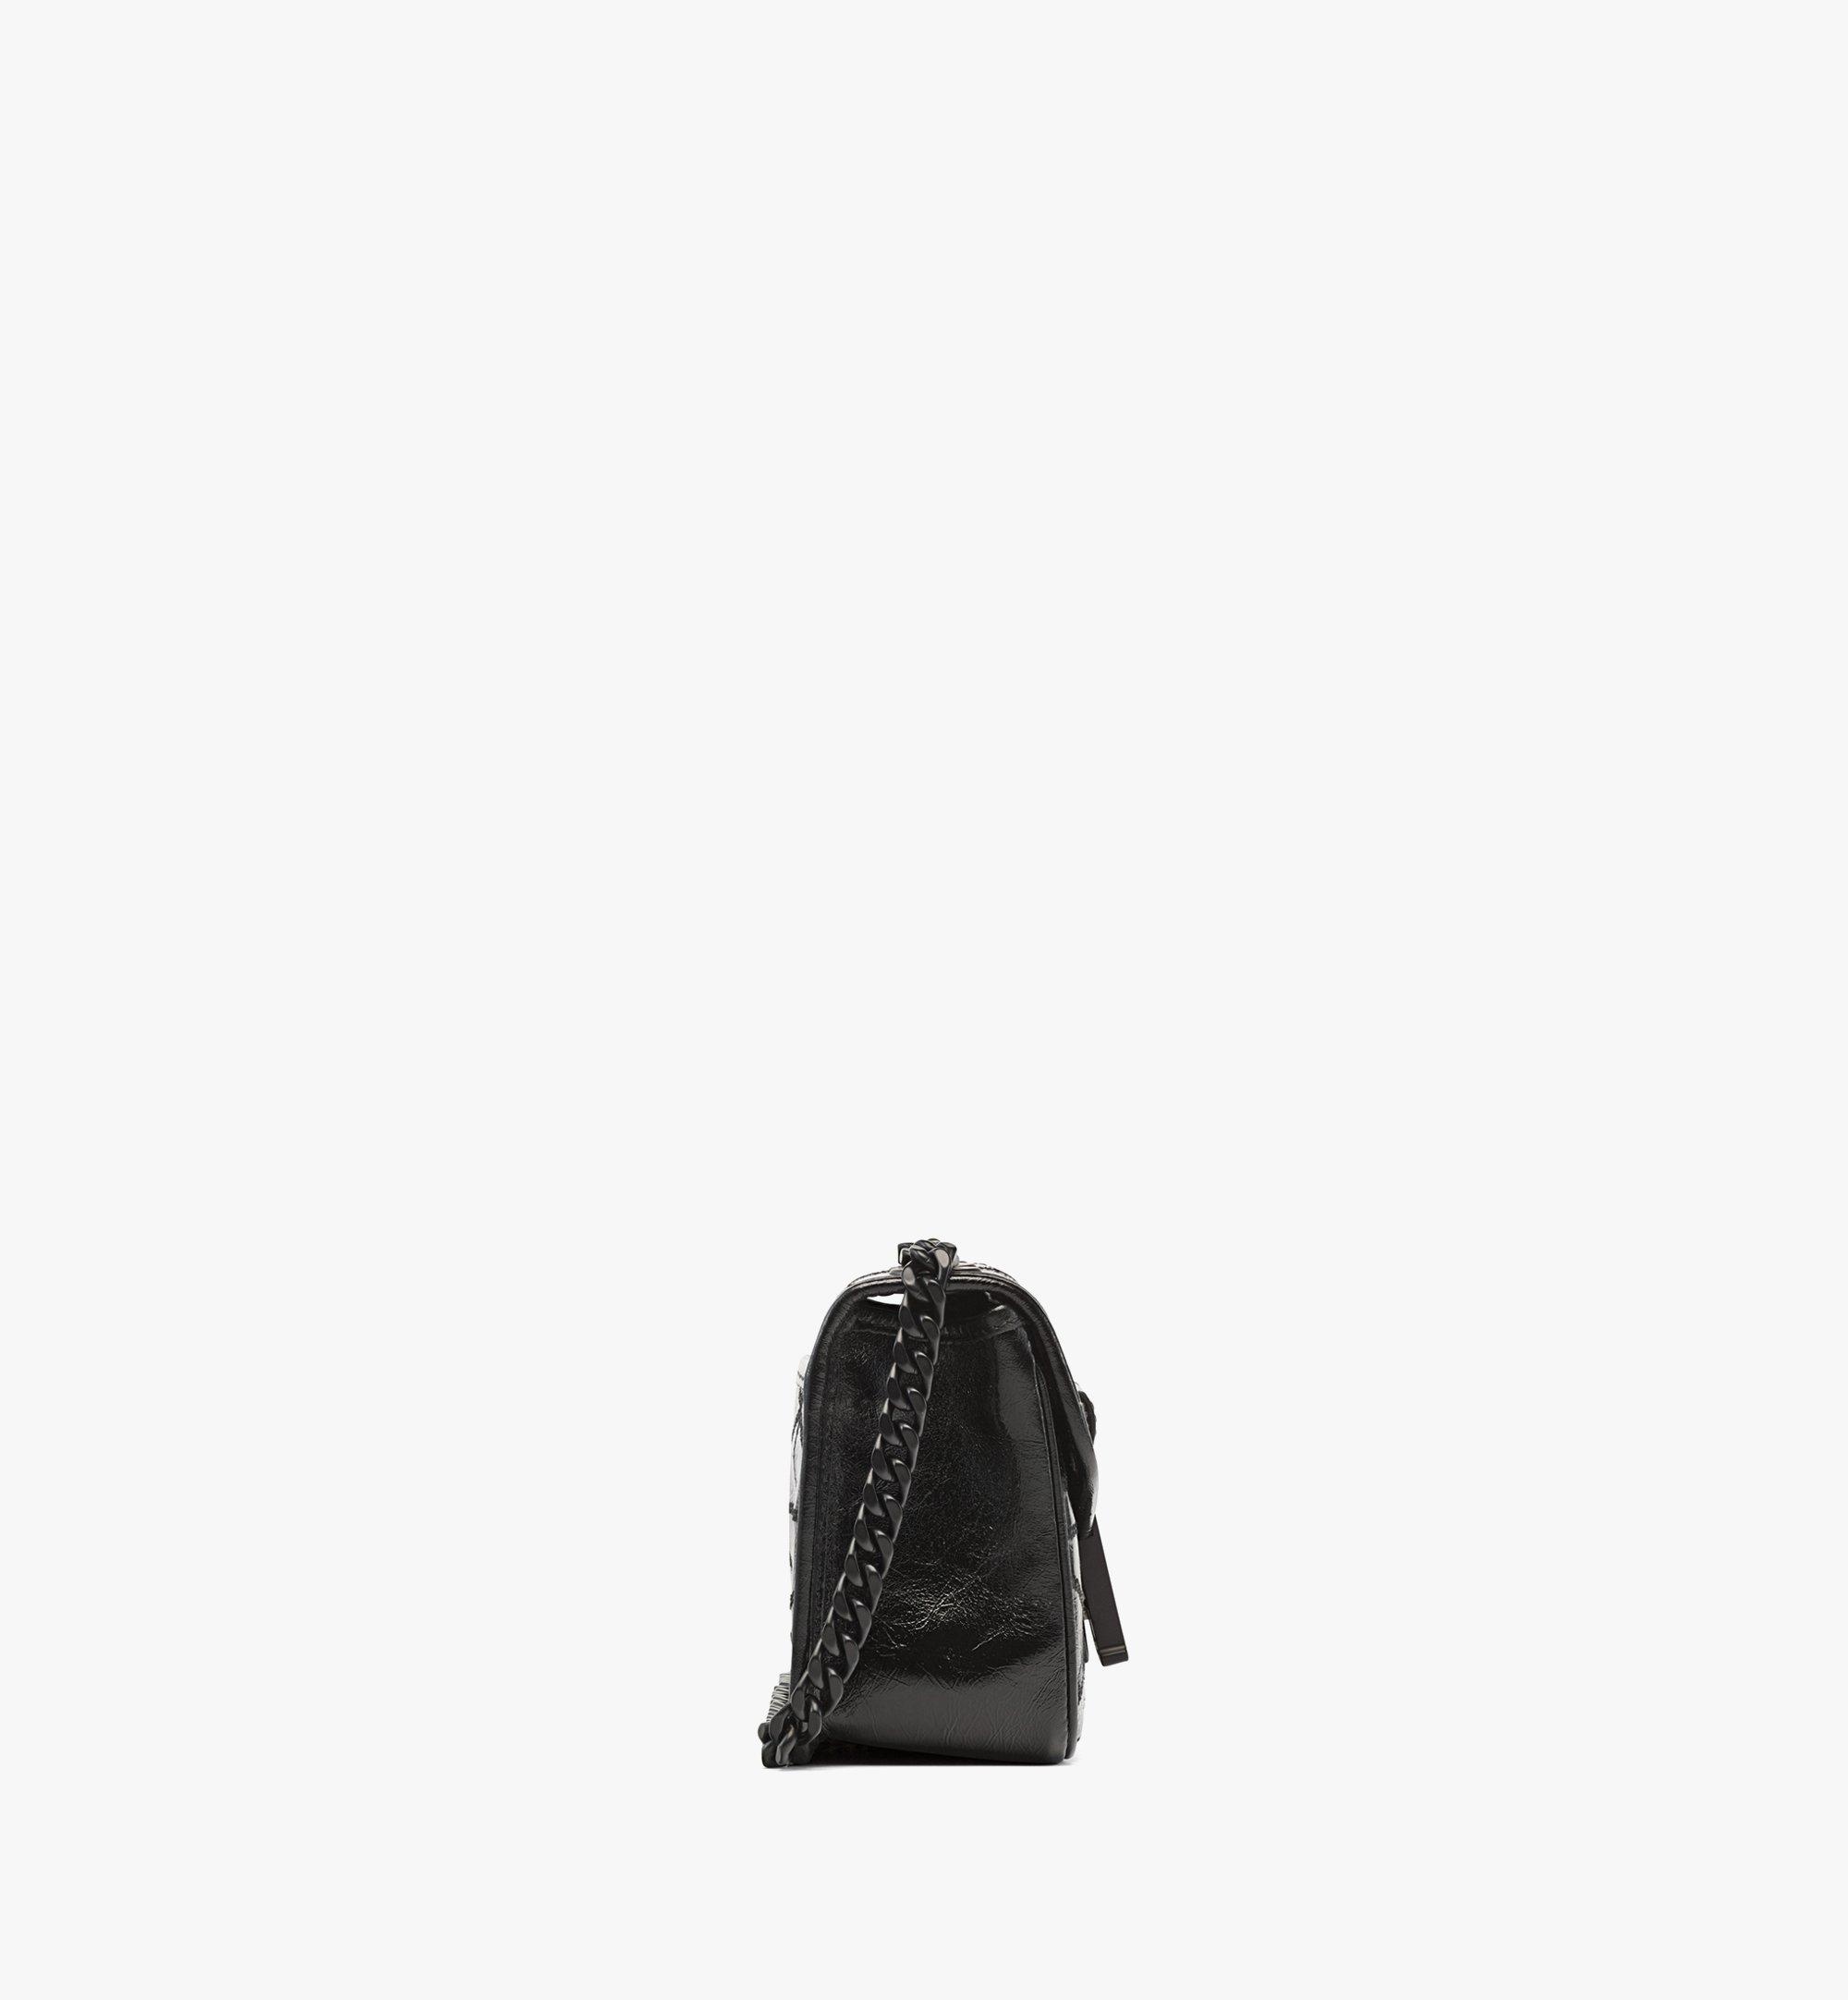 Travia Quilted Shoulder Bag in Crushed Leather - 3